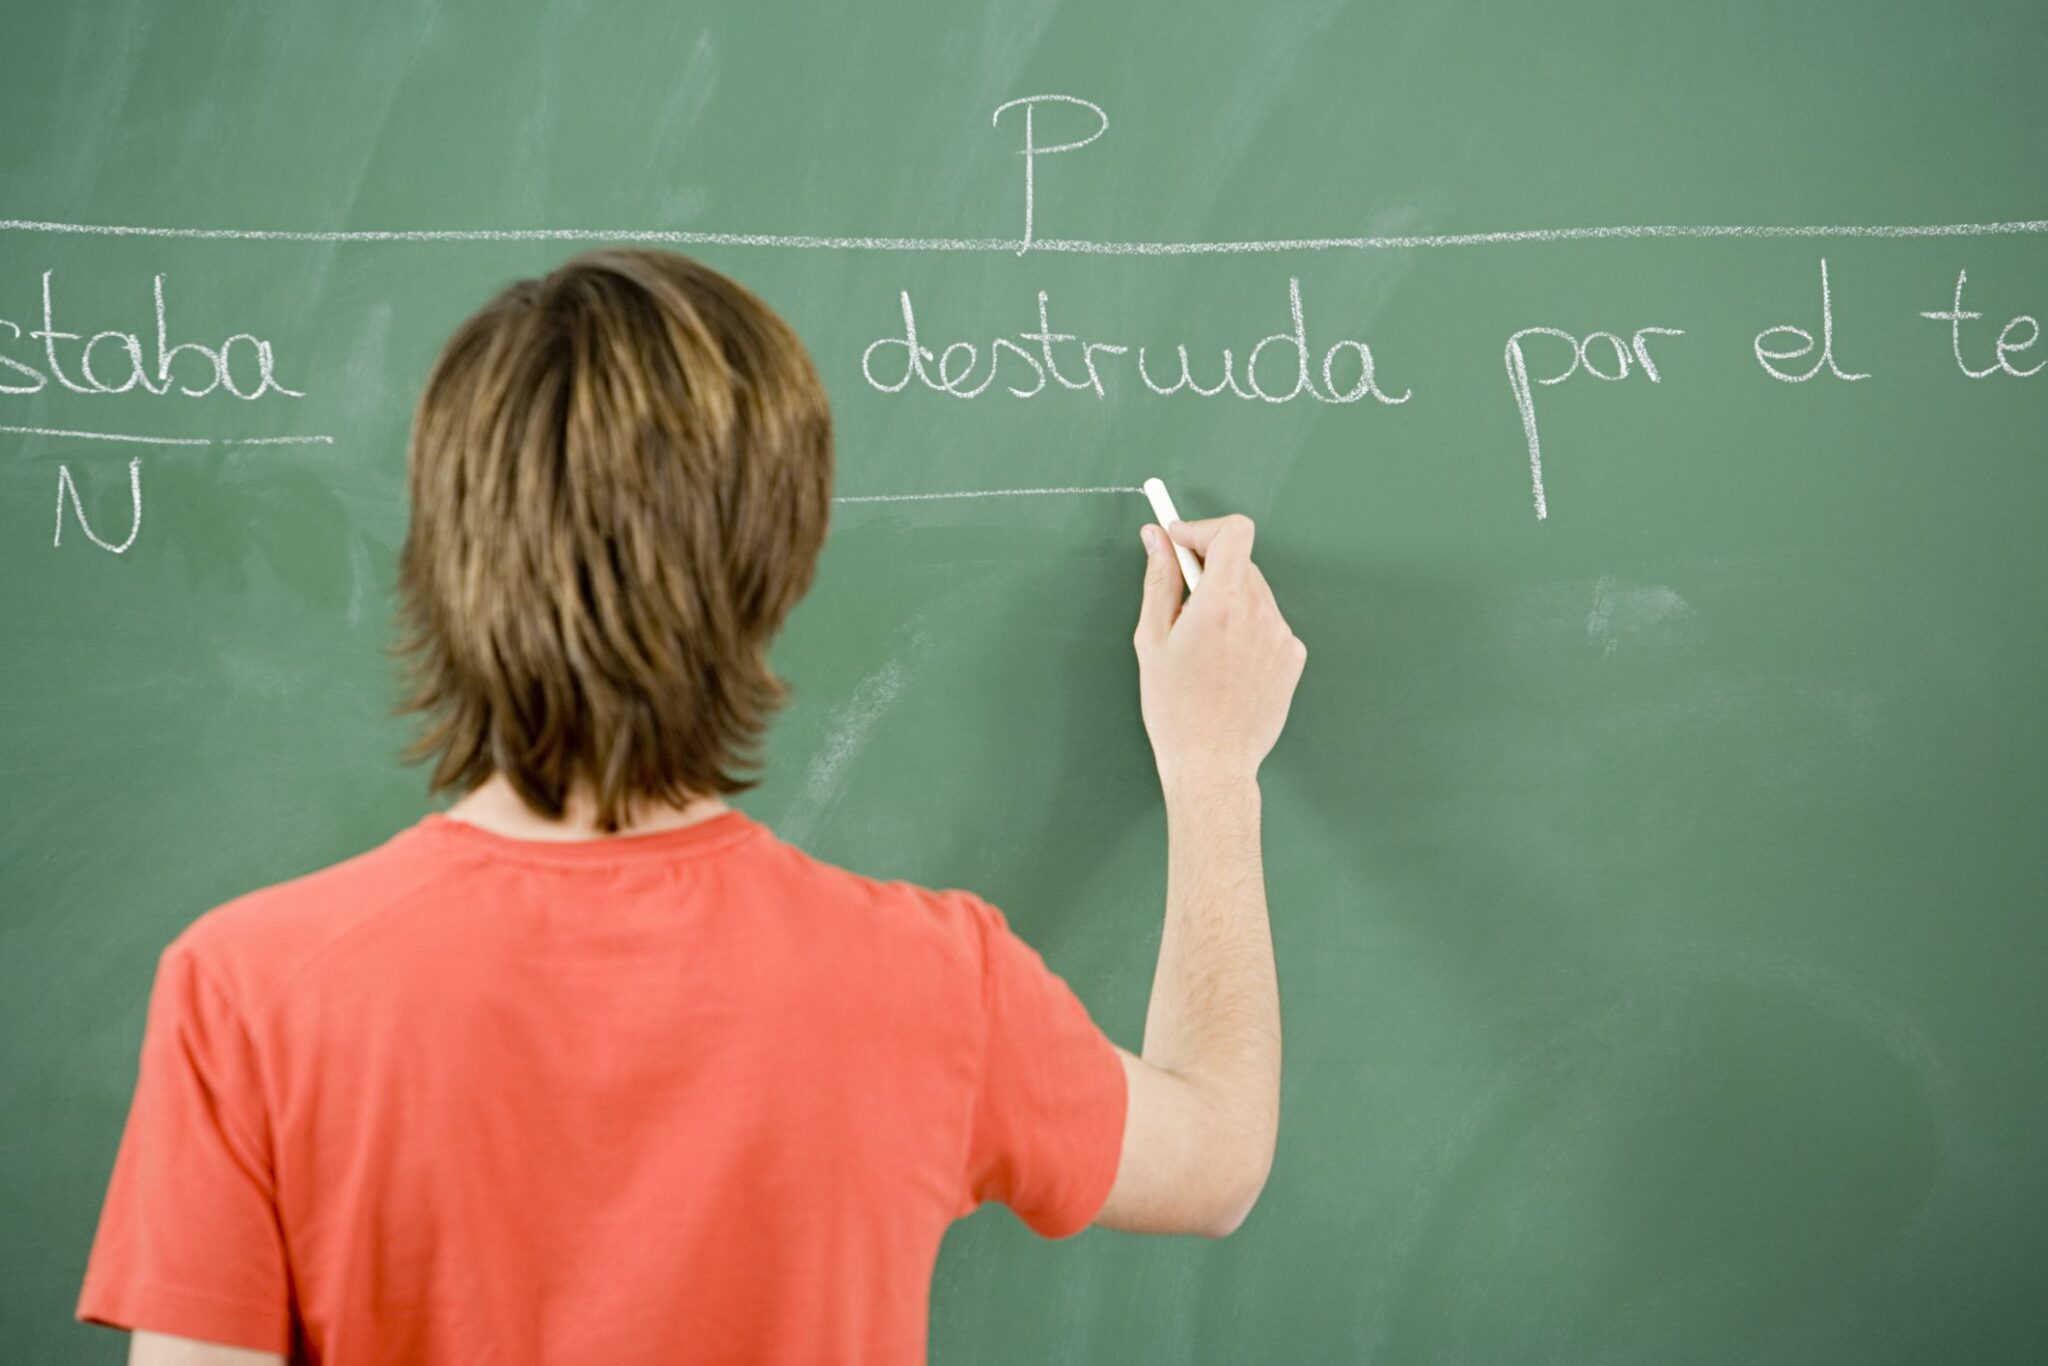 english-lessons-for-spanish-speakers-can-help-your-career-read-dive